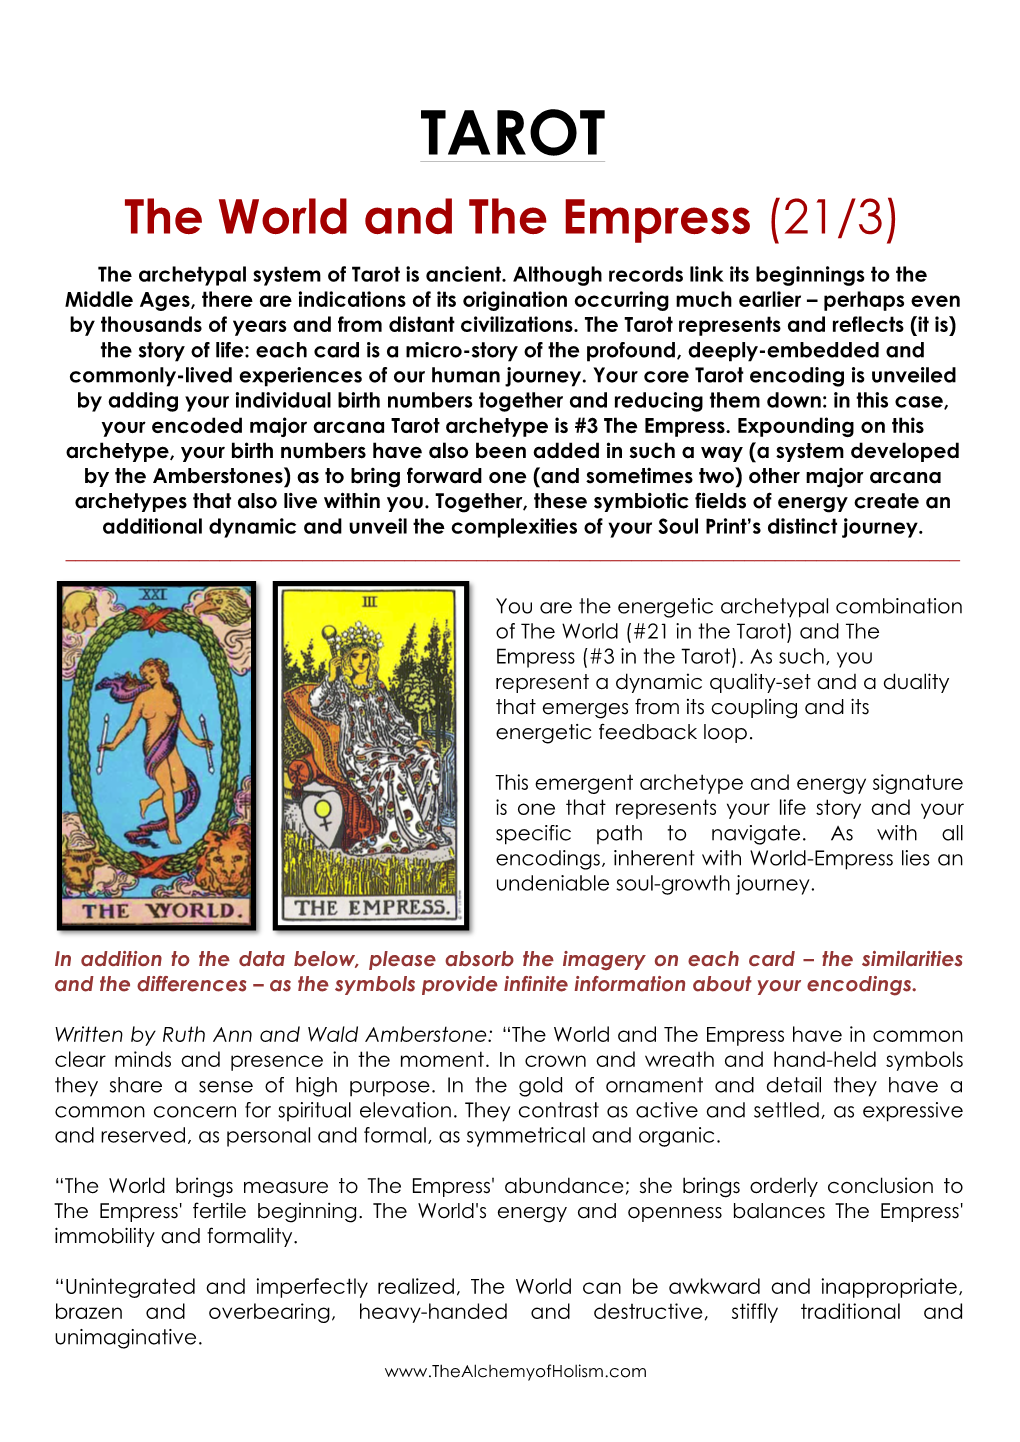 TAROT the World and the Empress